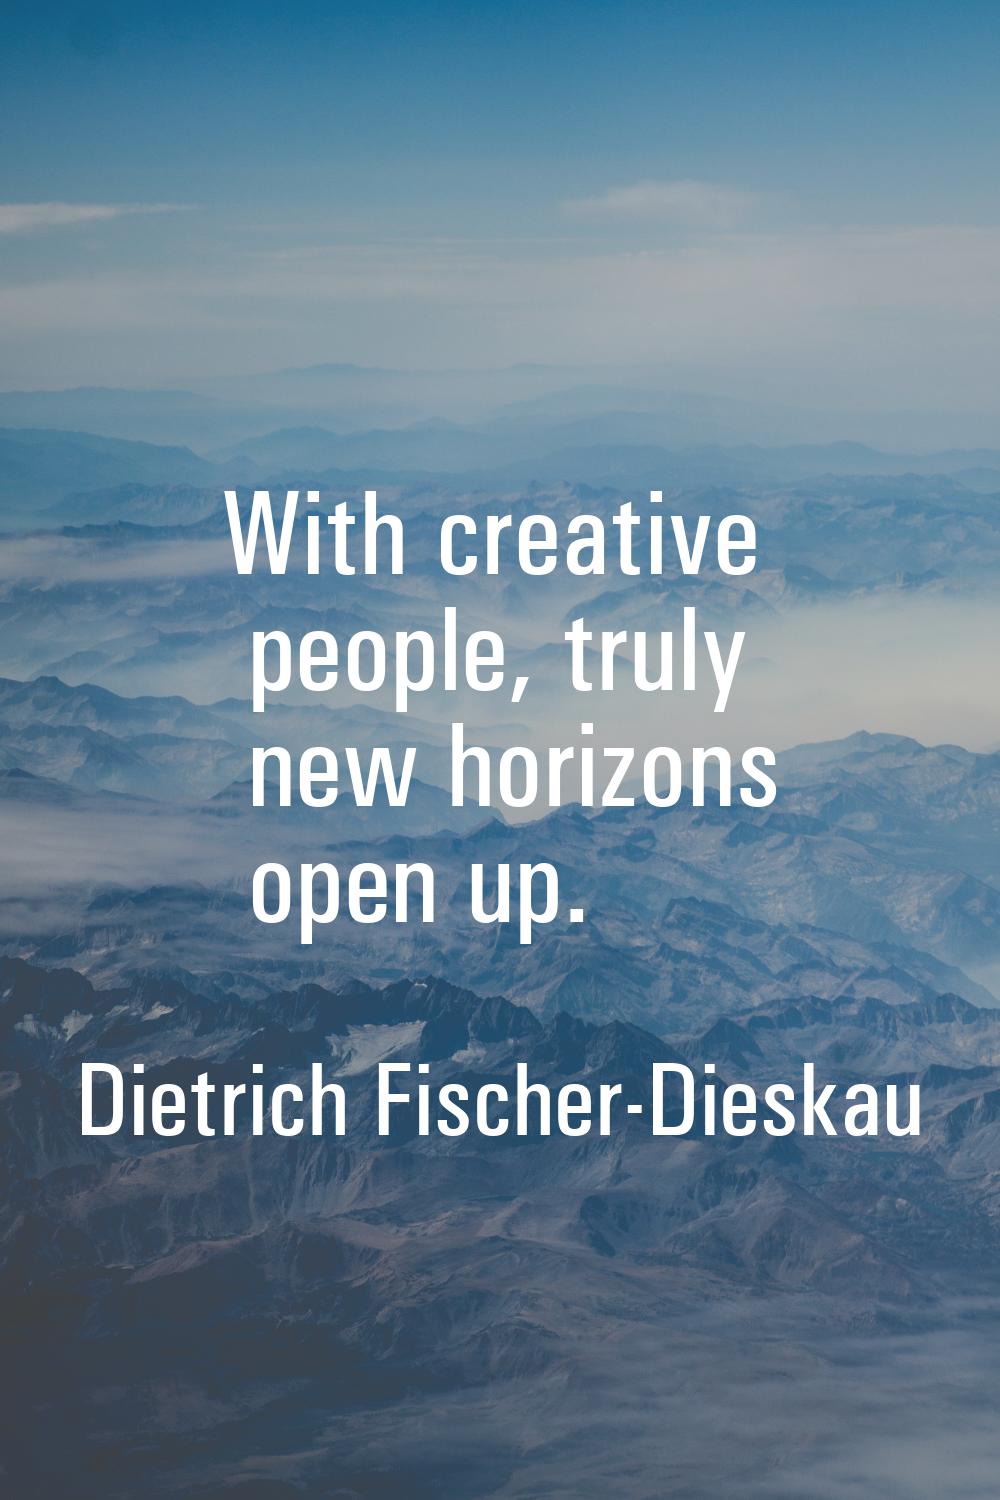 With creative people, truly new horizons open up.